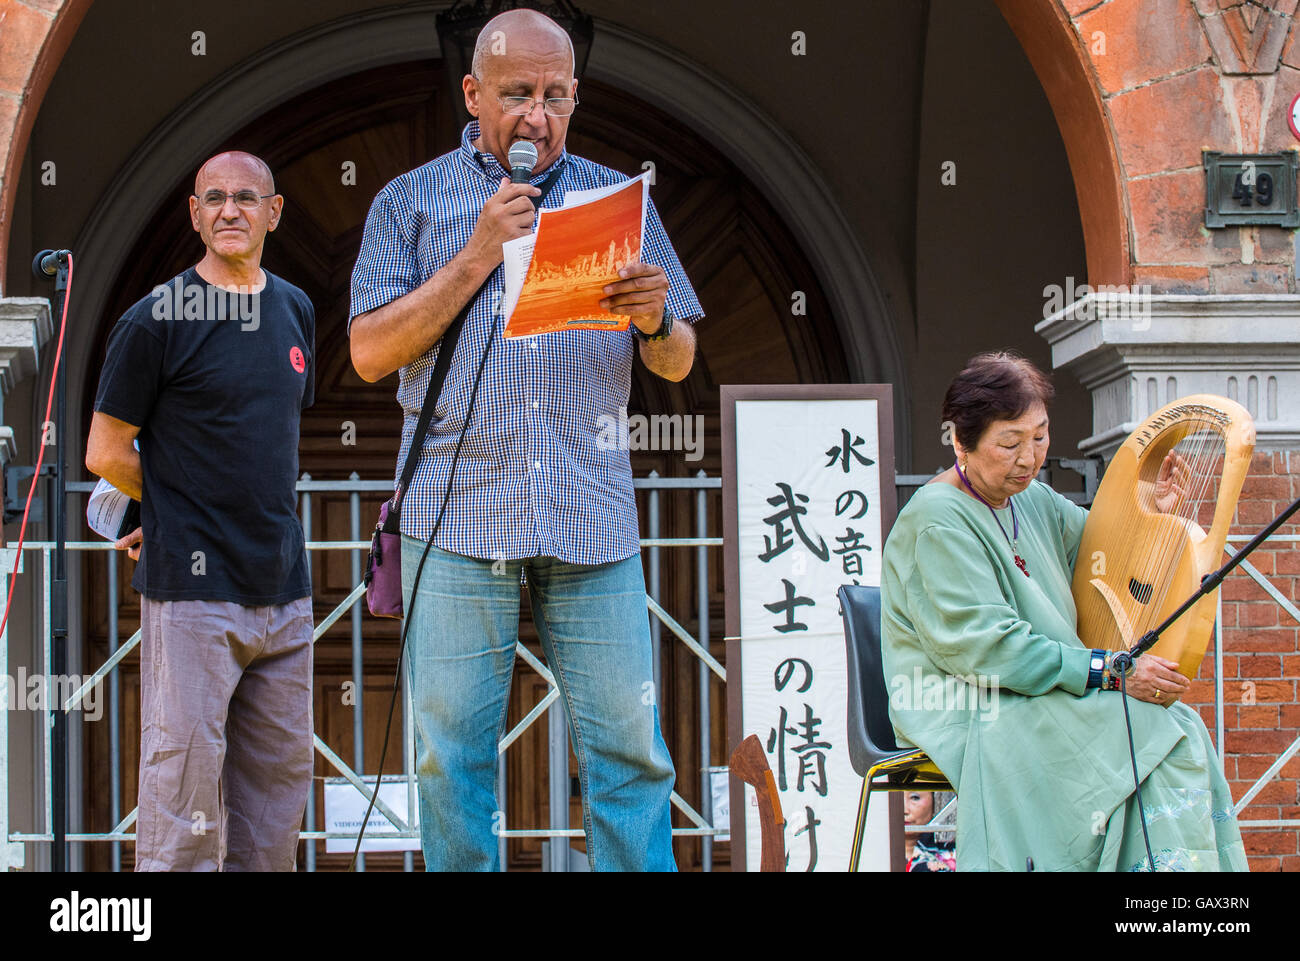 Turin, Italy. 5th July, 2016. Arsenal of Peace - Event 'Living in harmony for universal peace' - Organized by Master Paolo Spagone, the Zen School, Mizu No Oto - for the 150 years of friendship and cooperation between Italy and Japan - Japanese artists - Yoshiko Kurahara vocalist - Miyuki Ikesue which sounds of Little Harp - Shiho Yabuki pianist and expert on electronic-Takamitsu Yanaka tools vocalist, guitarist, composer and creator of the celestial sound instruments such as the lyre, and the 12-string harp Angelic - Gerbi Valter presents the event Credit:  Realy Easy Star/Alamy Live News Stock Photo